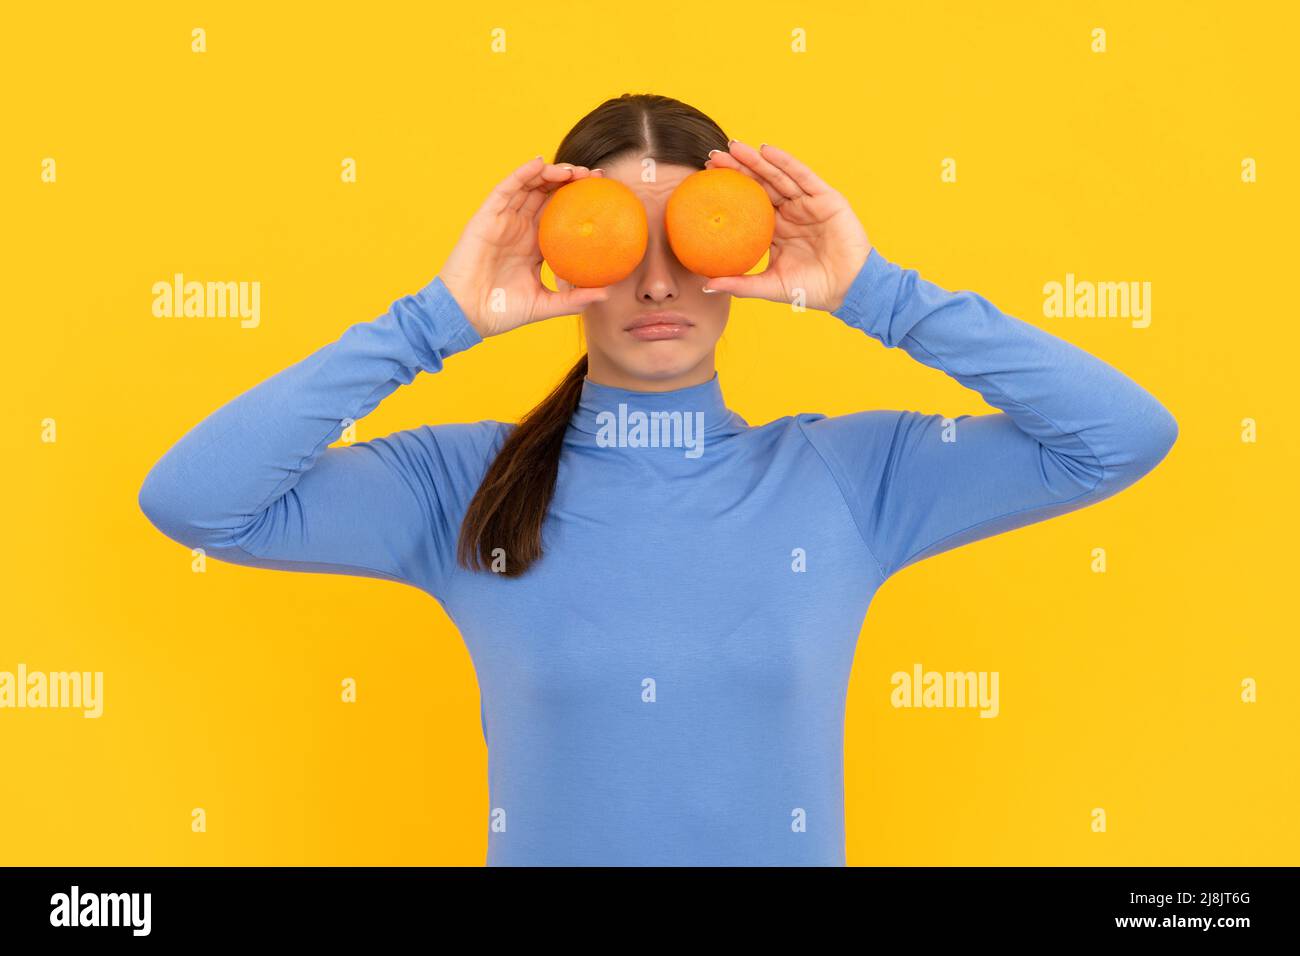 funny girl with orange citrus fruit. vitamin and dieting. woman holding healthy food. Stock Photo